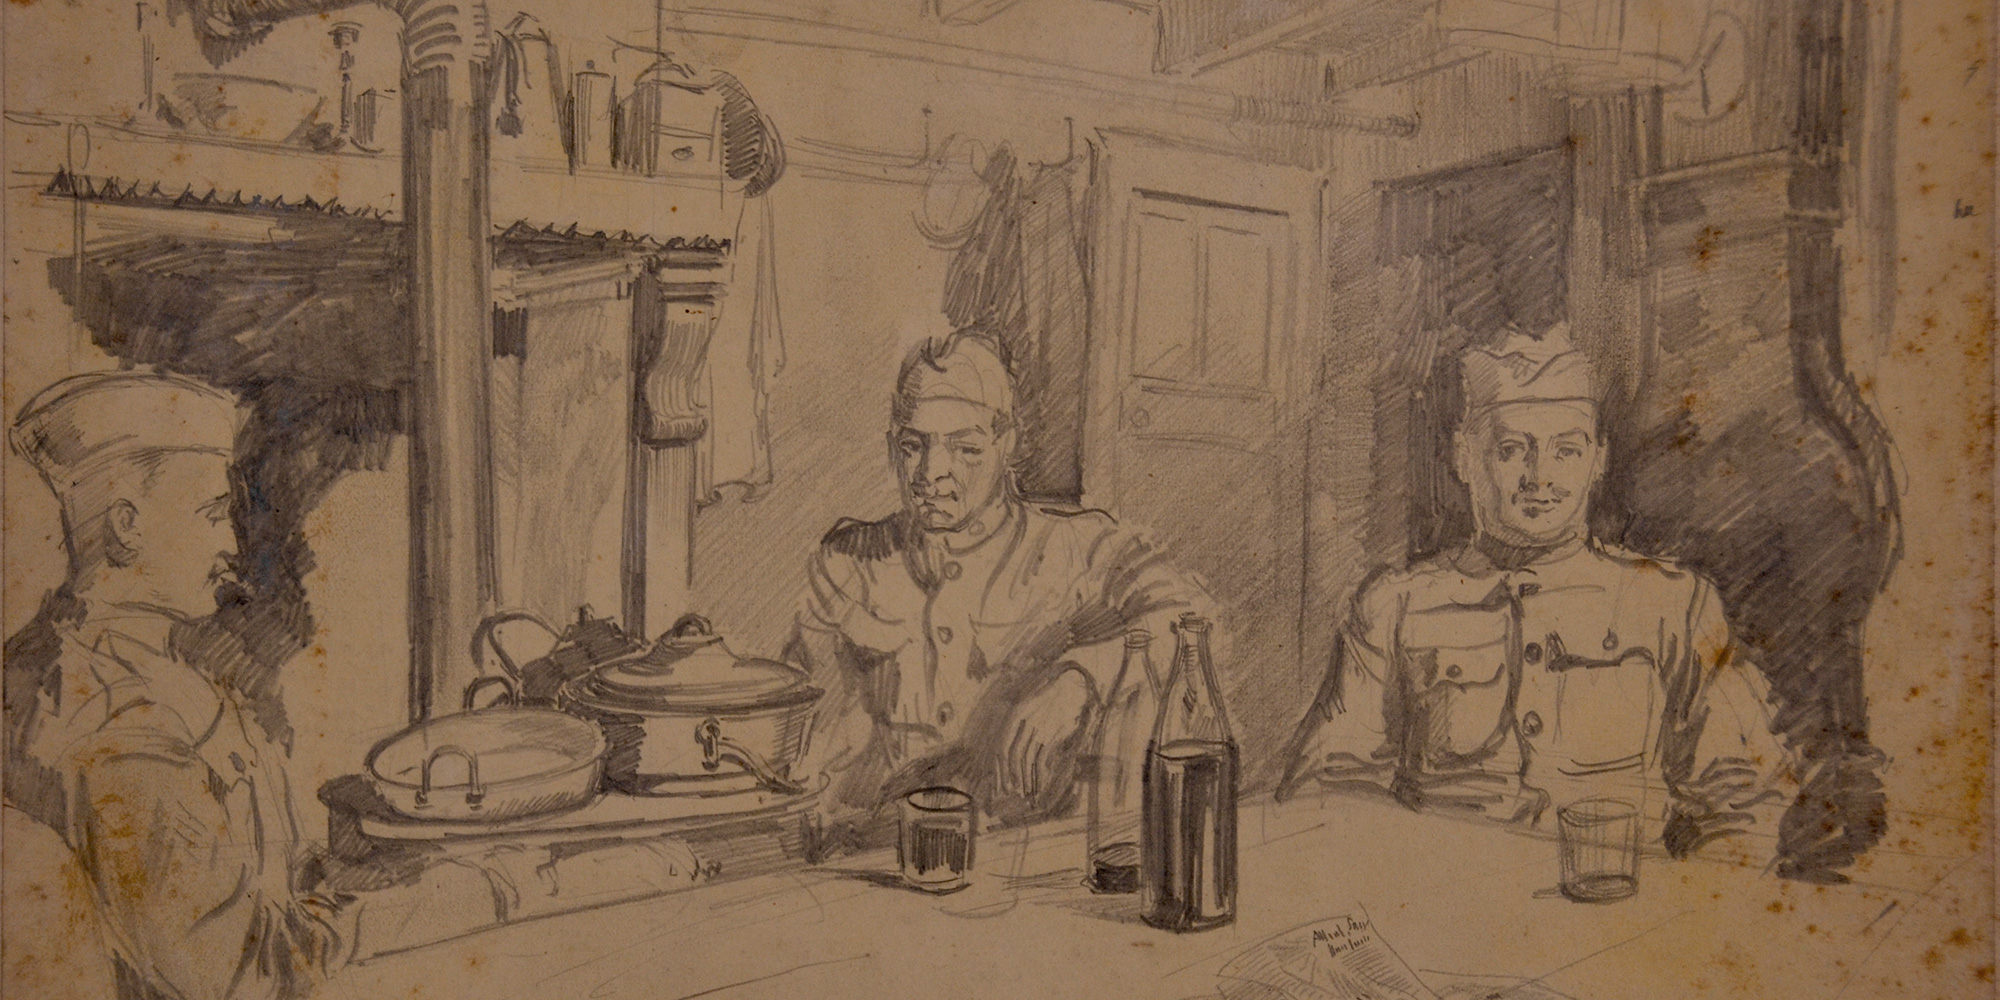 WWI drawing by H. C. Kiefer